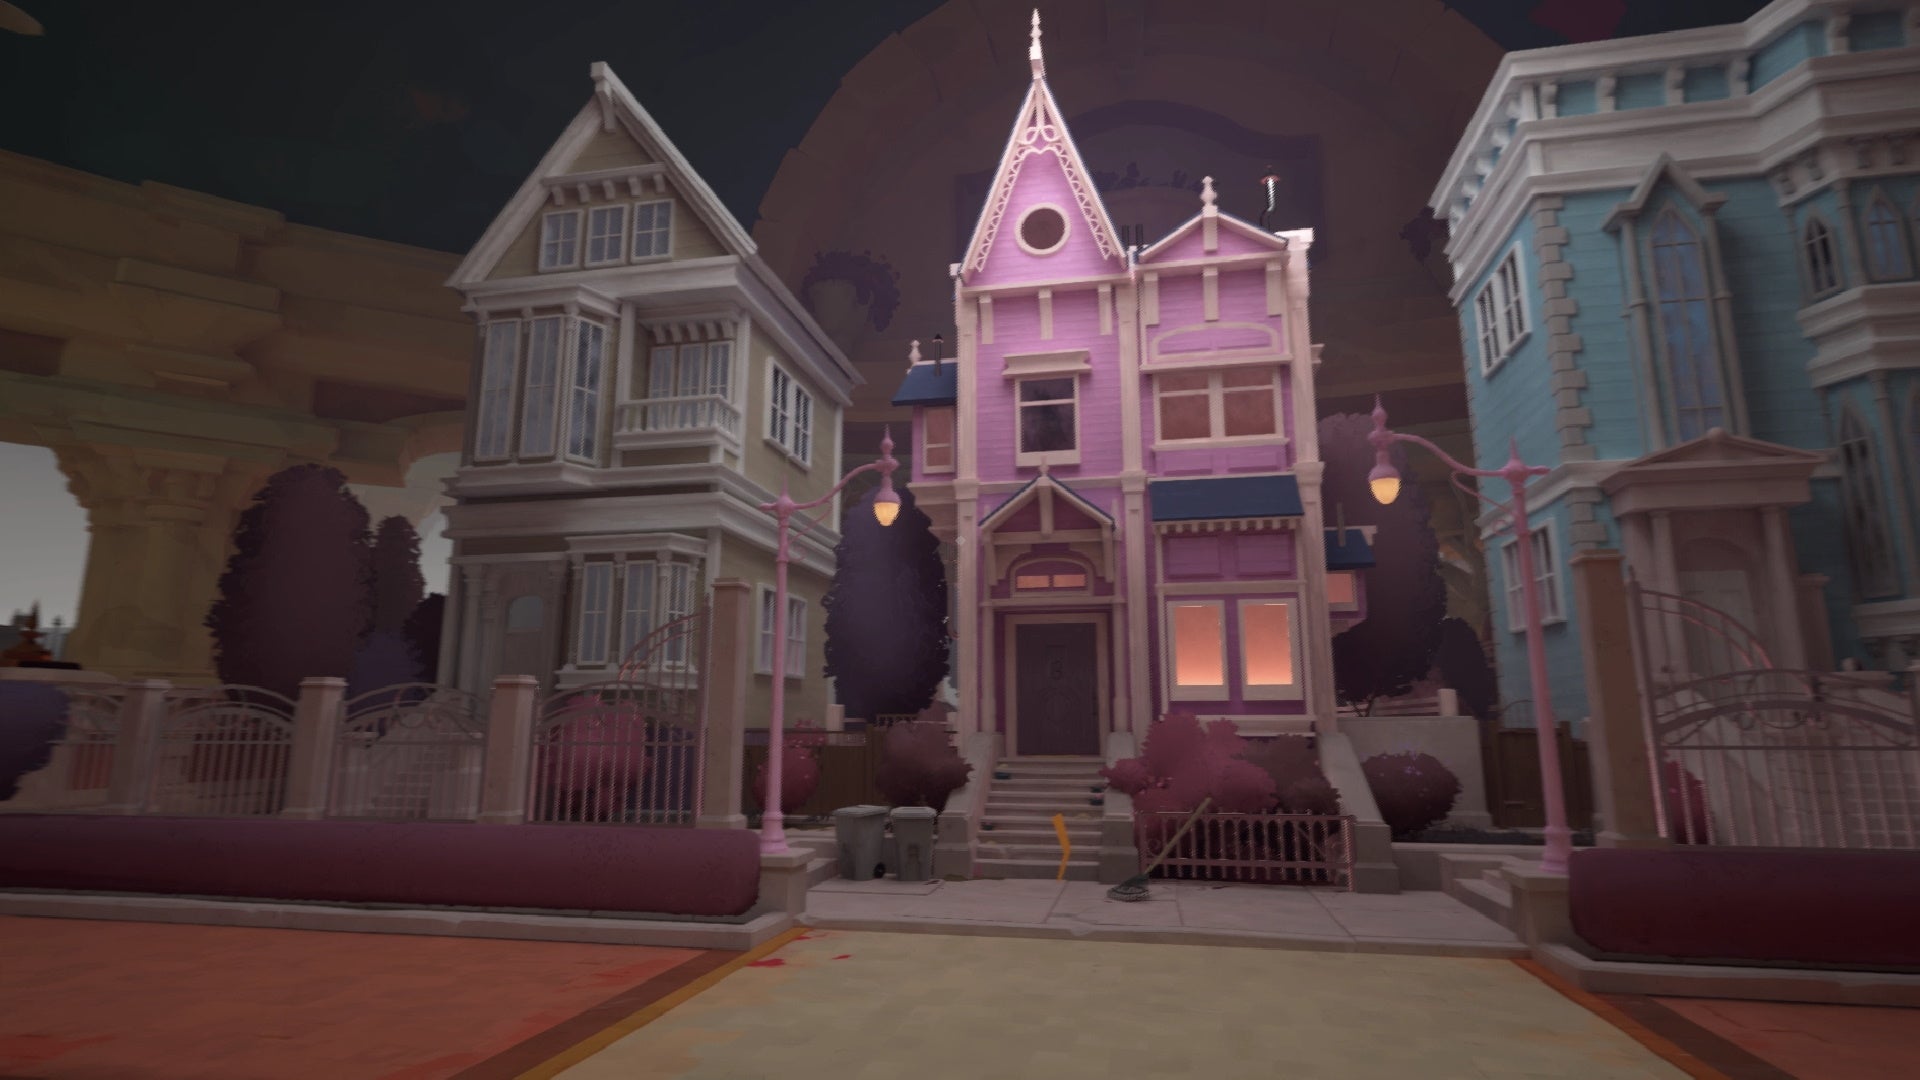 A screenshot of Maquette which shows three tall houses, one in the middle is pink and the lights are on.